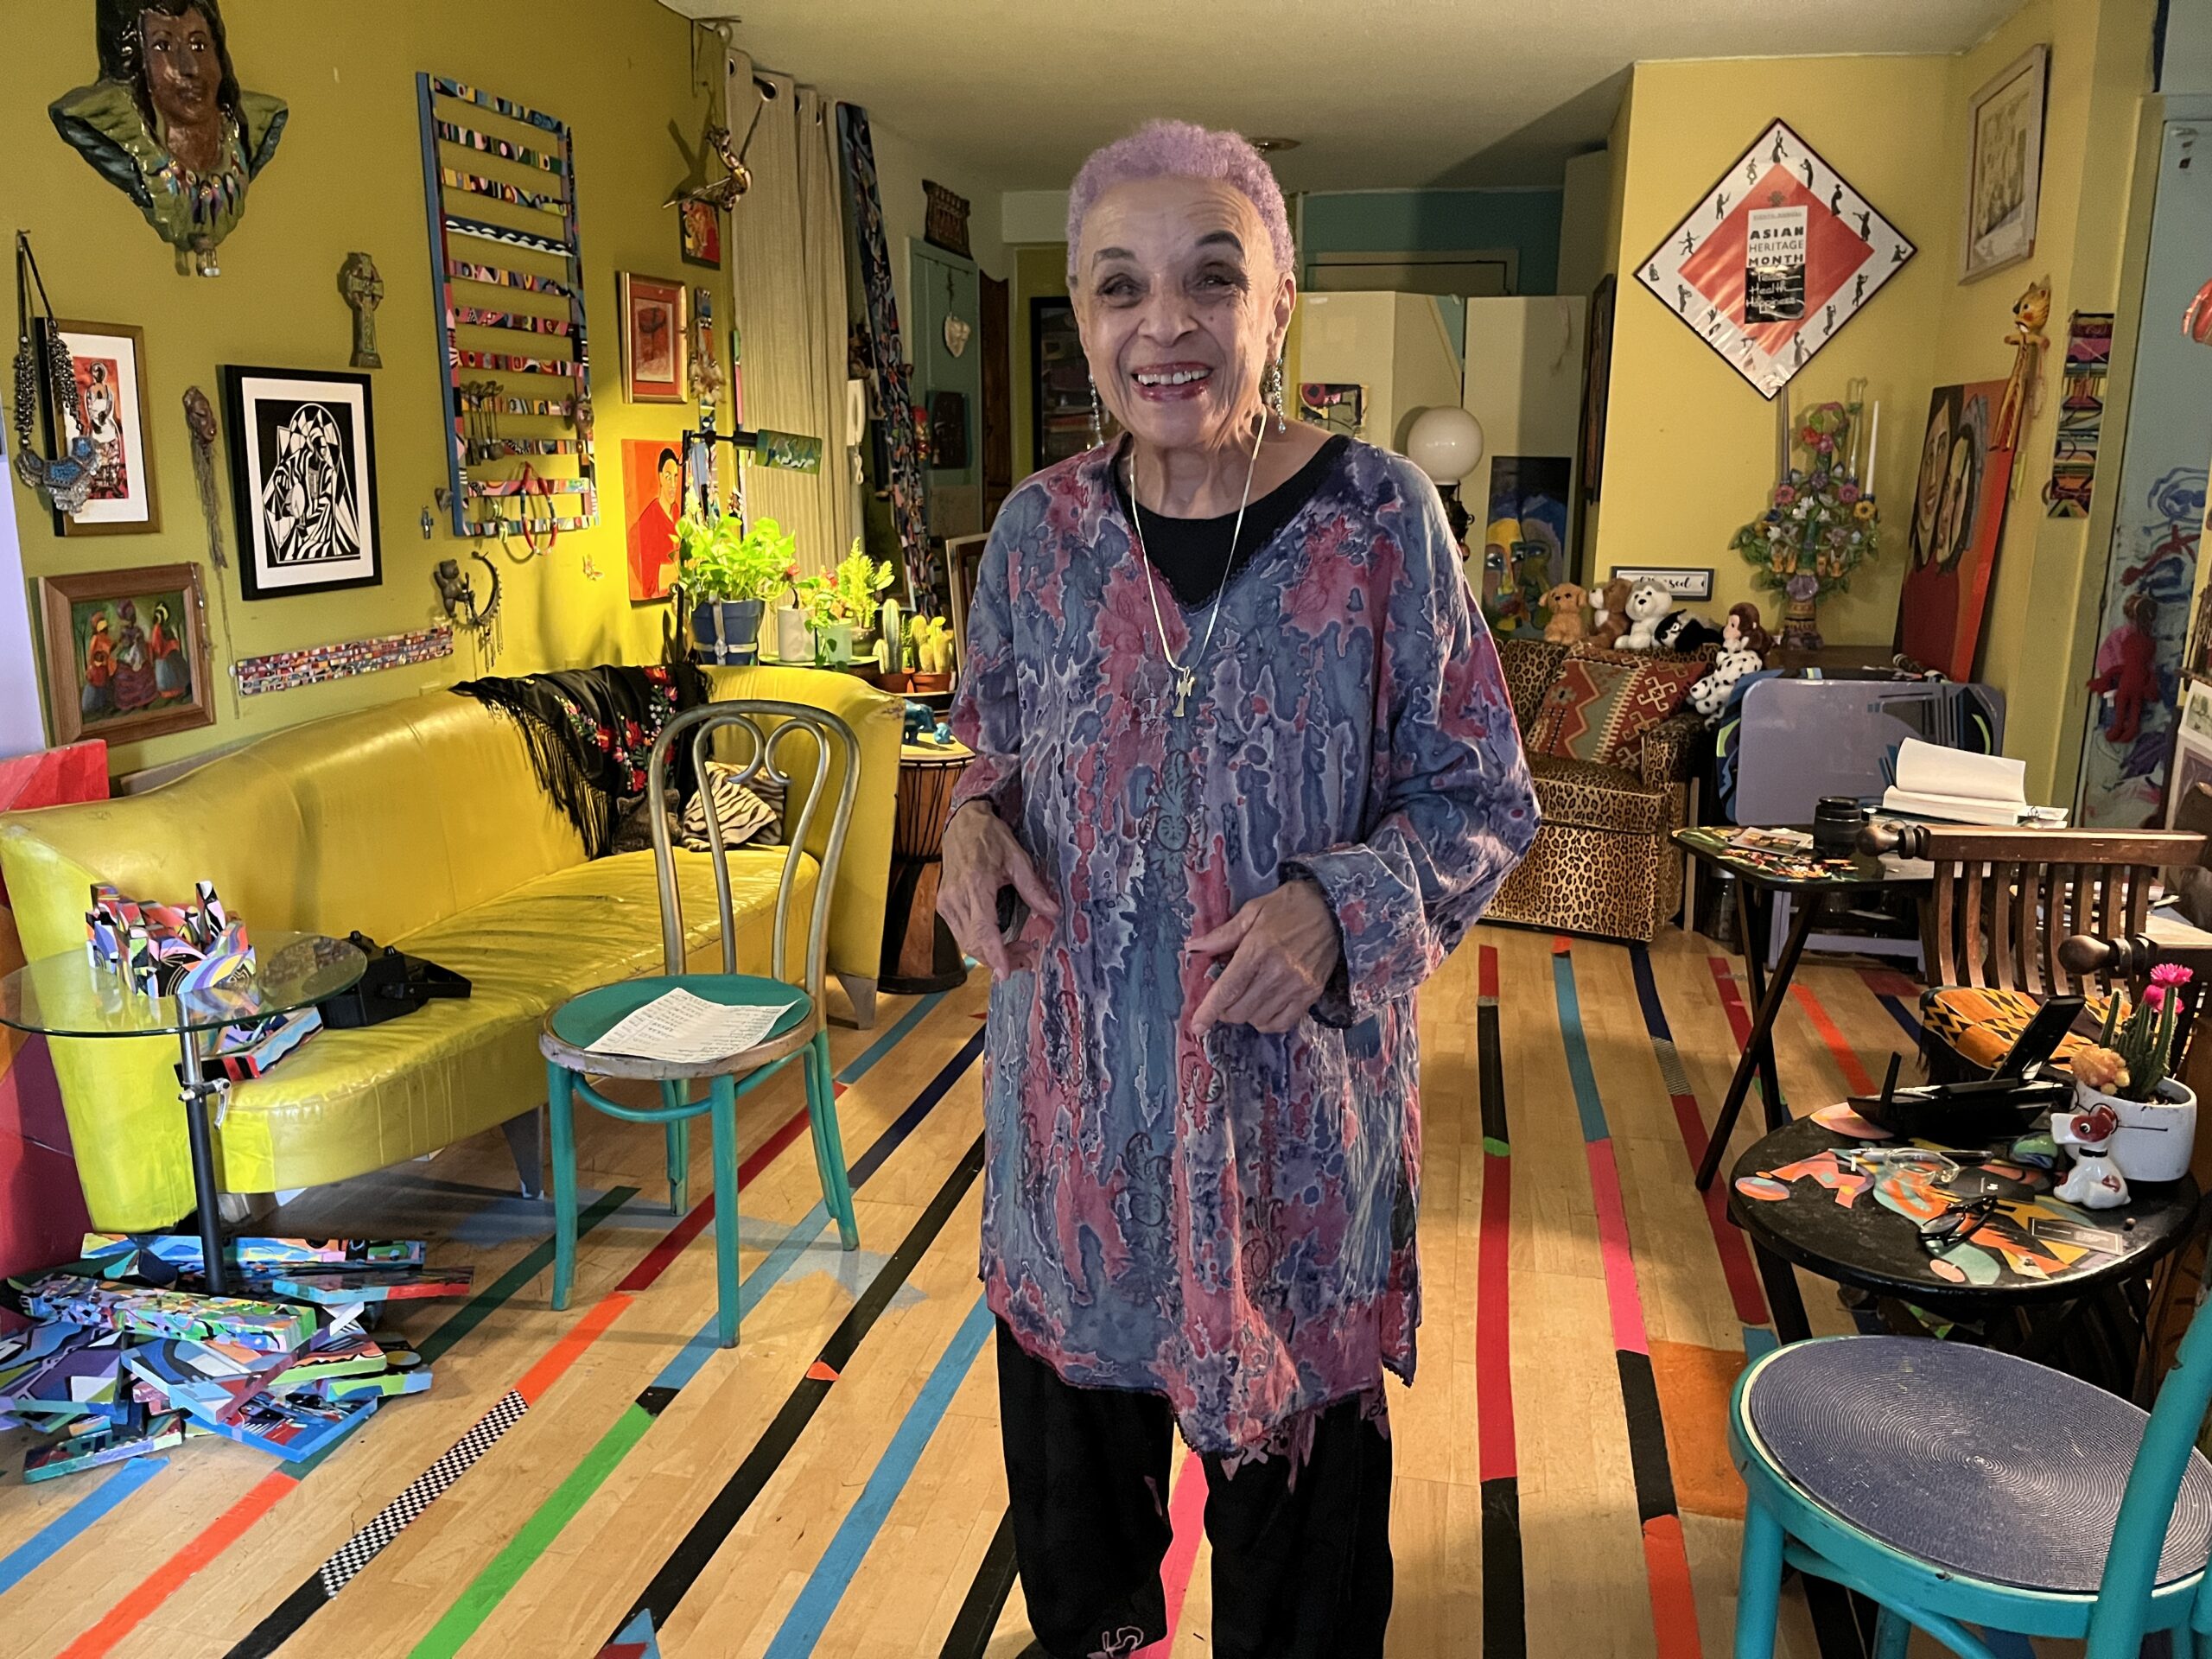 Nancy Brandon stands smiling in a brightly colored and eclectically decorated room, with a yellow sofa, various chairs, wall art, and vibrant patterns on the floor and walls.